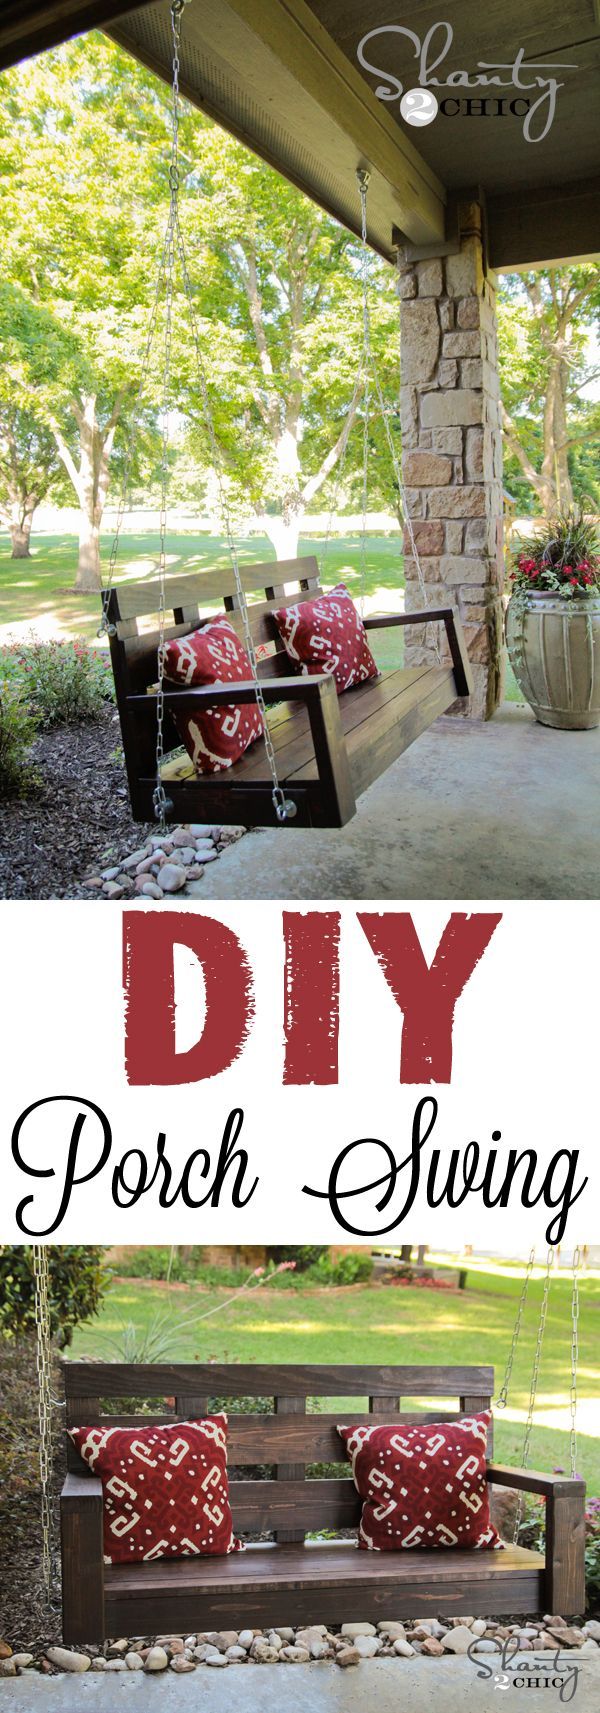 Easy DIY Porch Swing!  I want this!!!